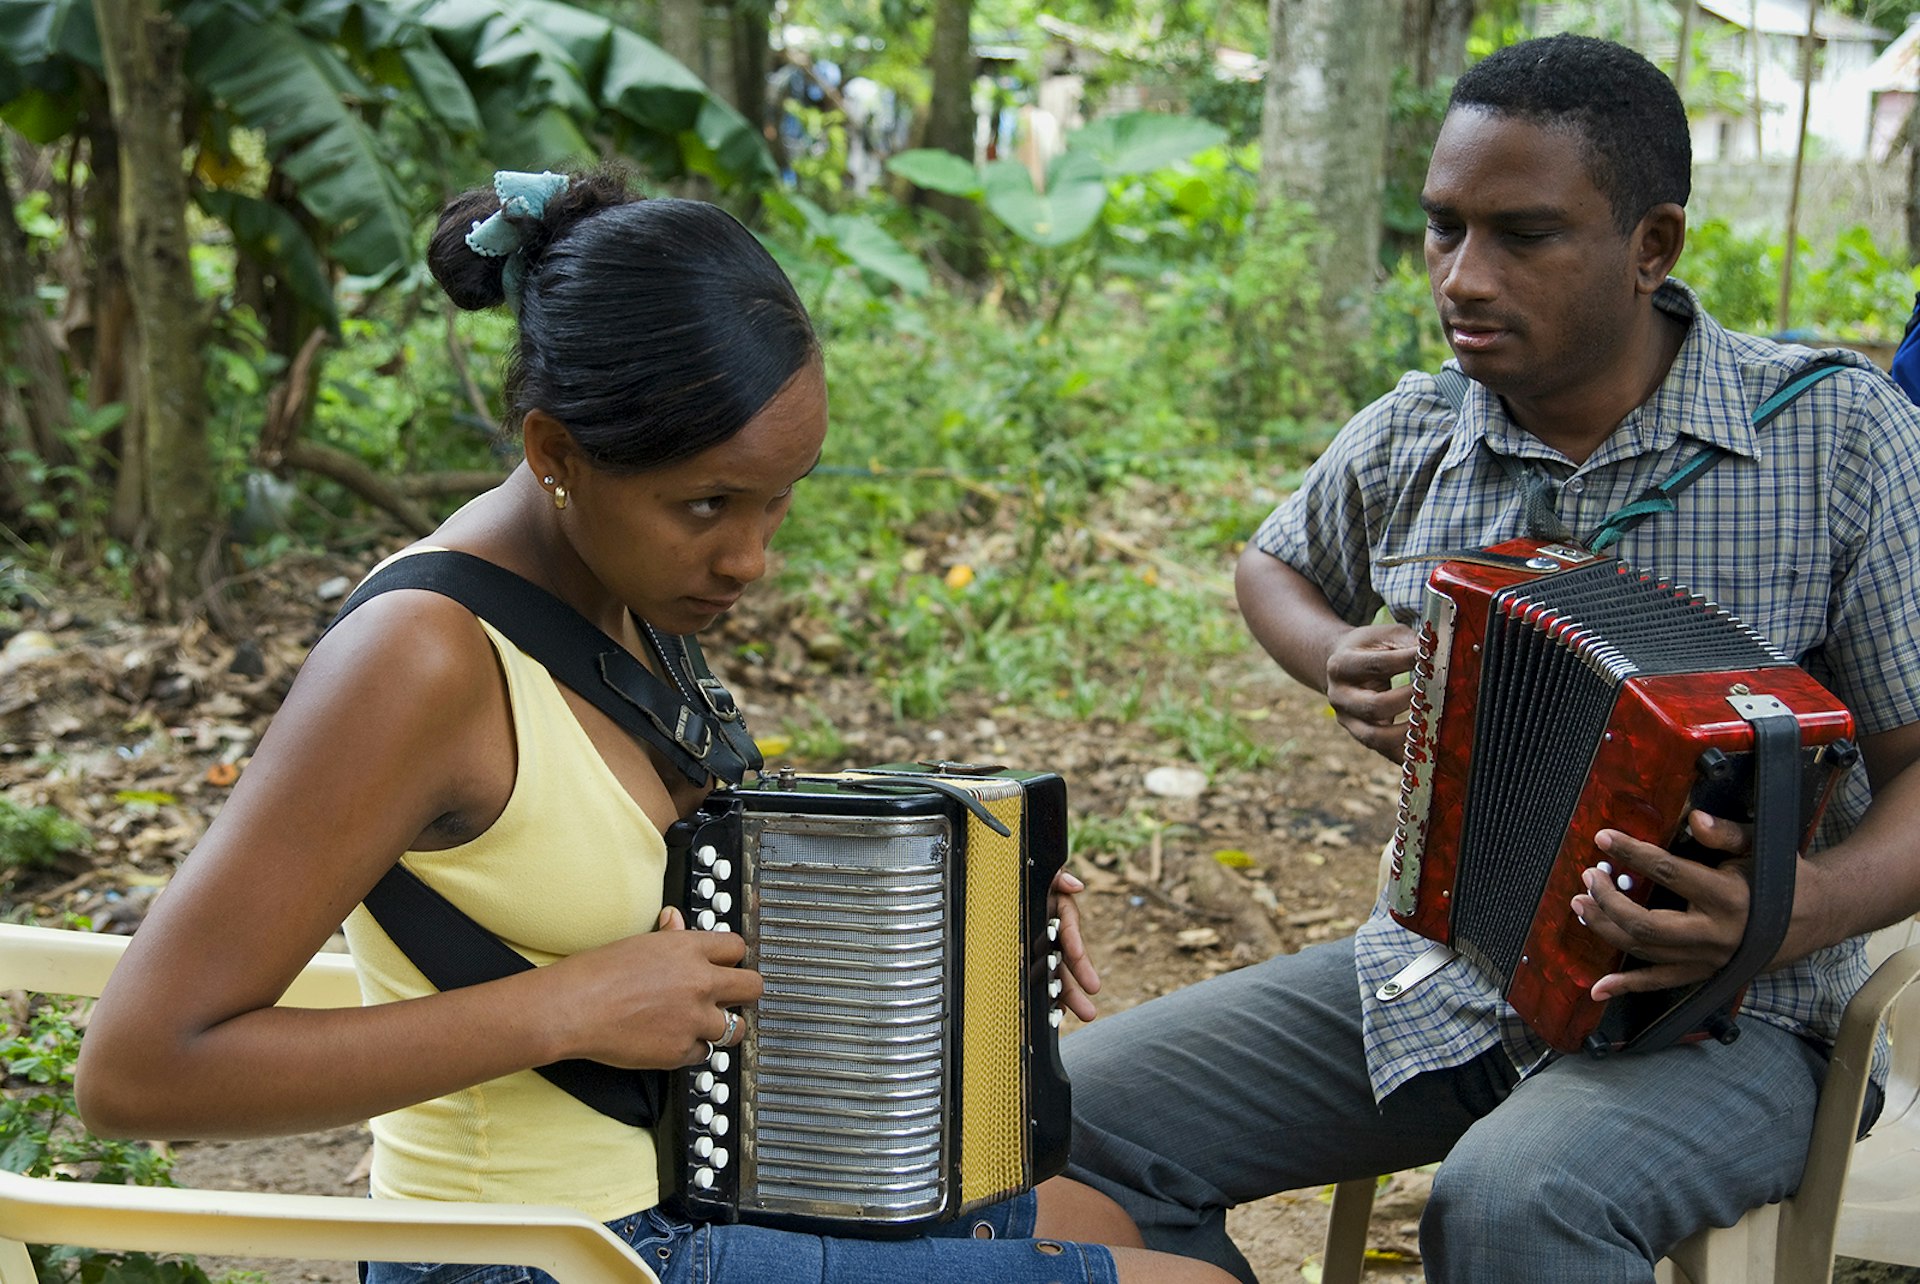 A student learns how to play merengue típico in Rio San Juan © Margie Politzer / Getty Images